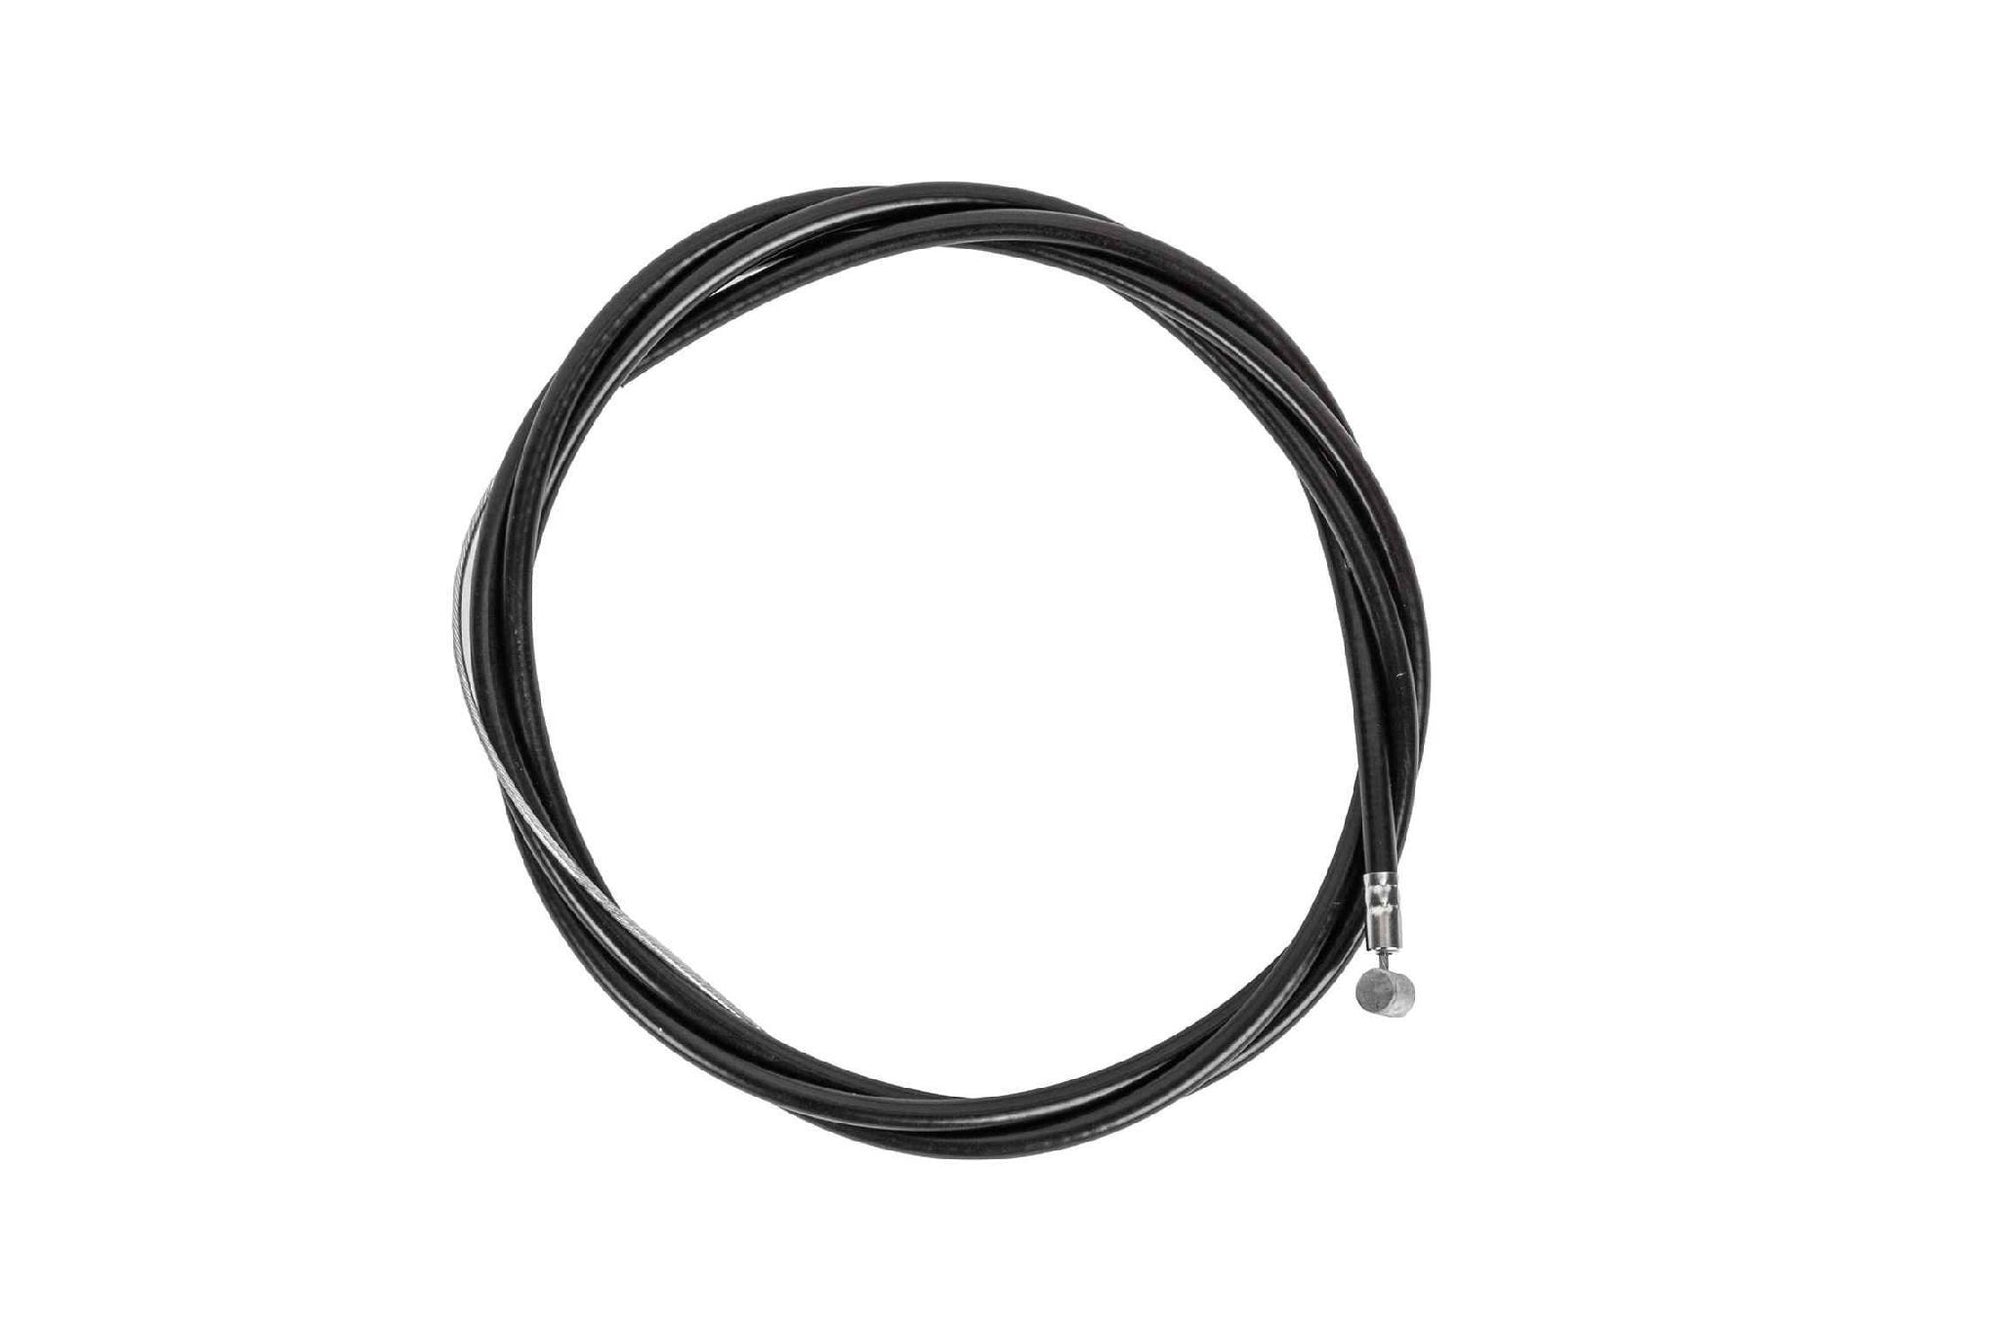 Odyssey Slic Kable Brake Cable - 1.5 Or 1.8mm